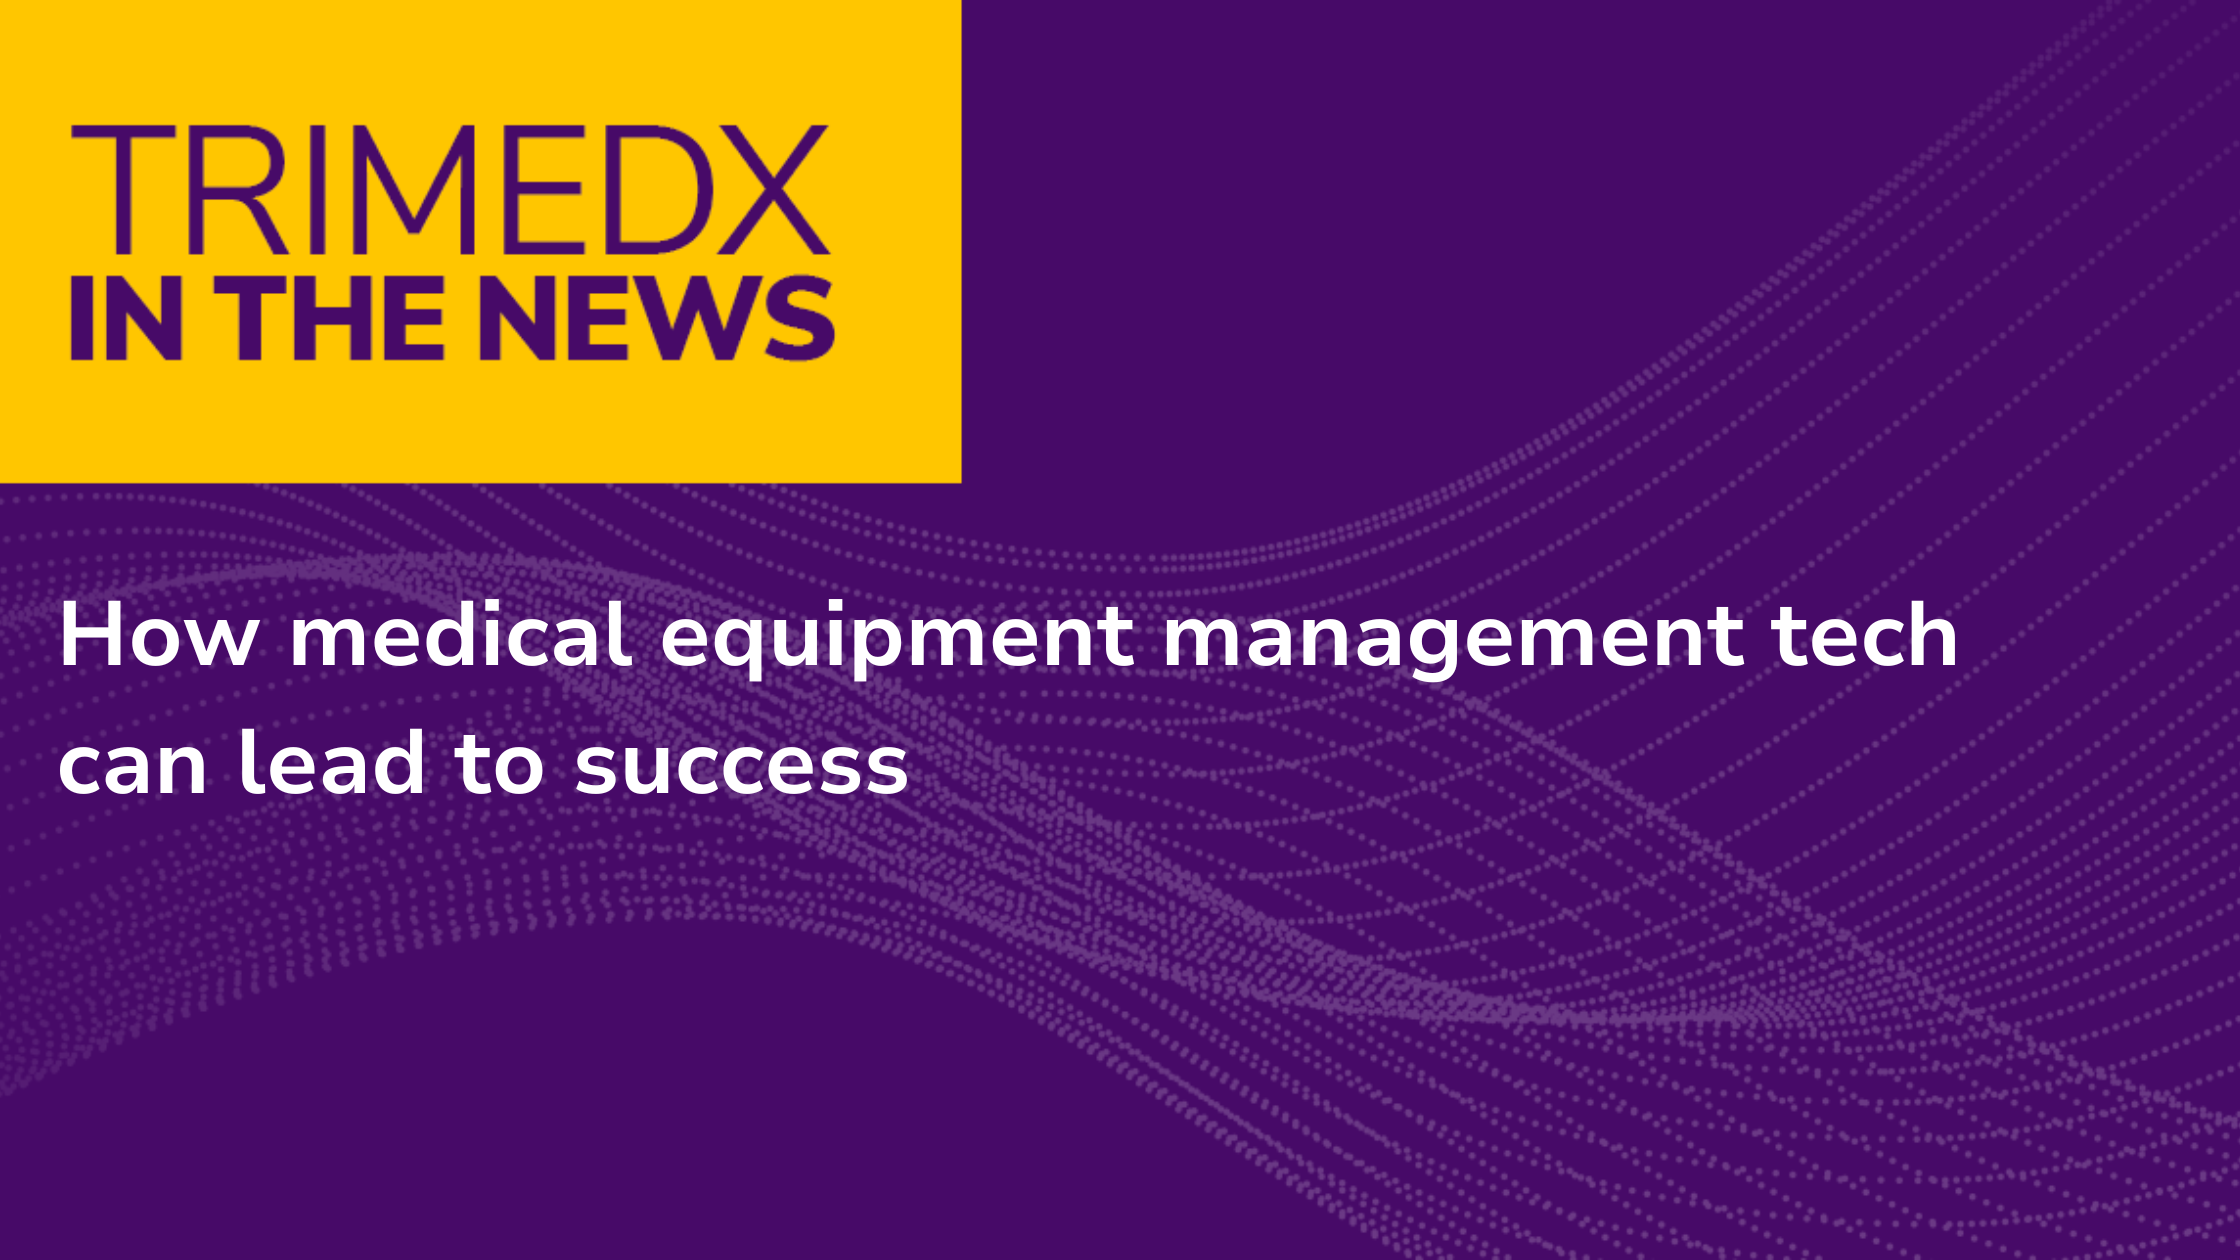 How medical equipment management tech can lead to success - TRIMEDX In the news graphic